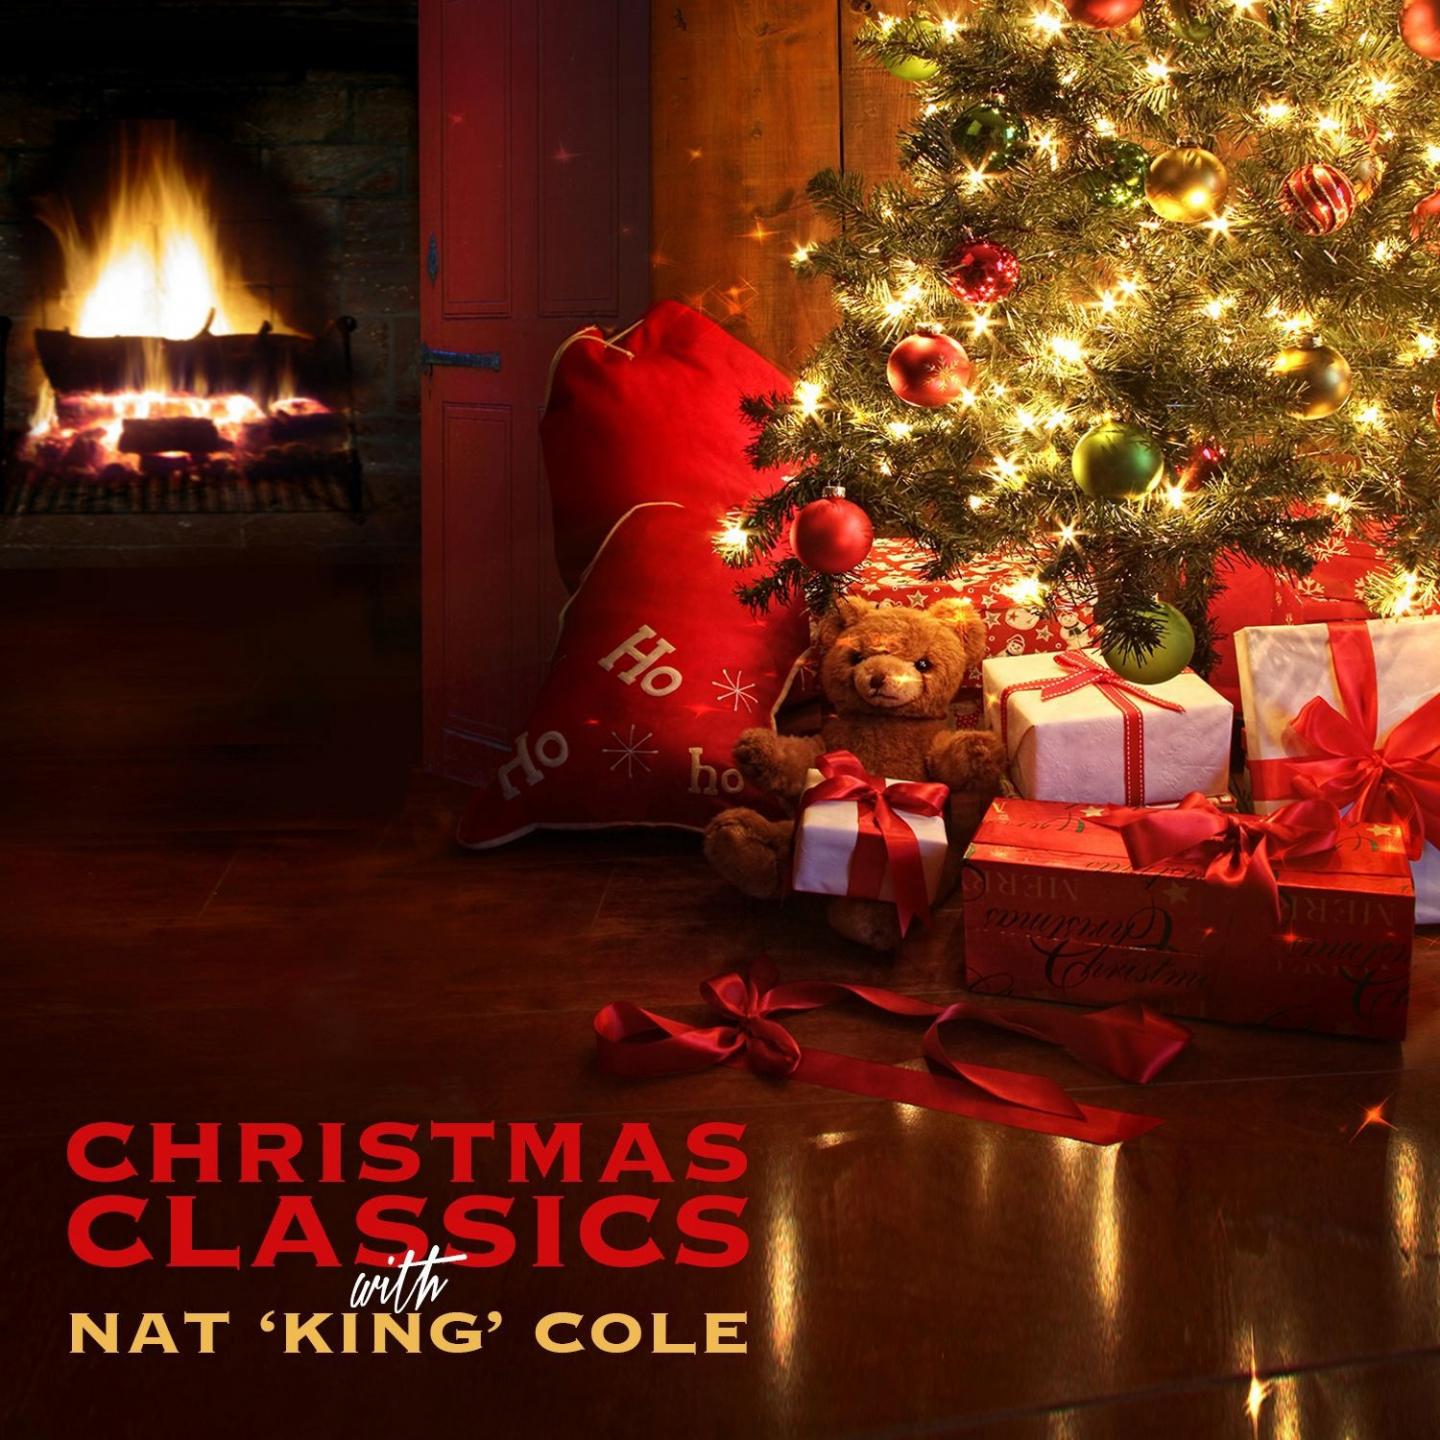 Christmas Classics with Nat "King" Cole